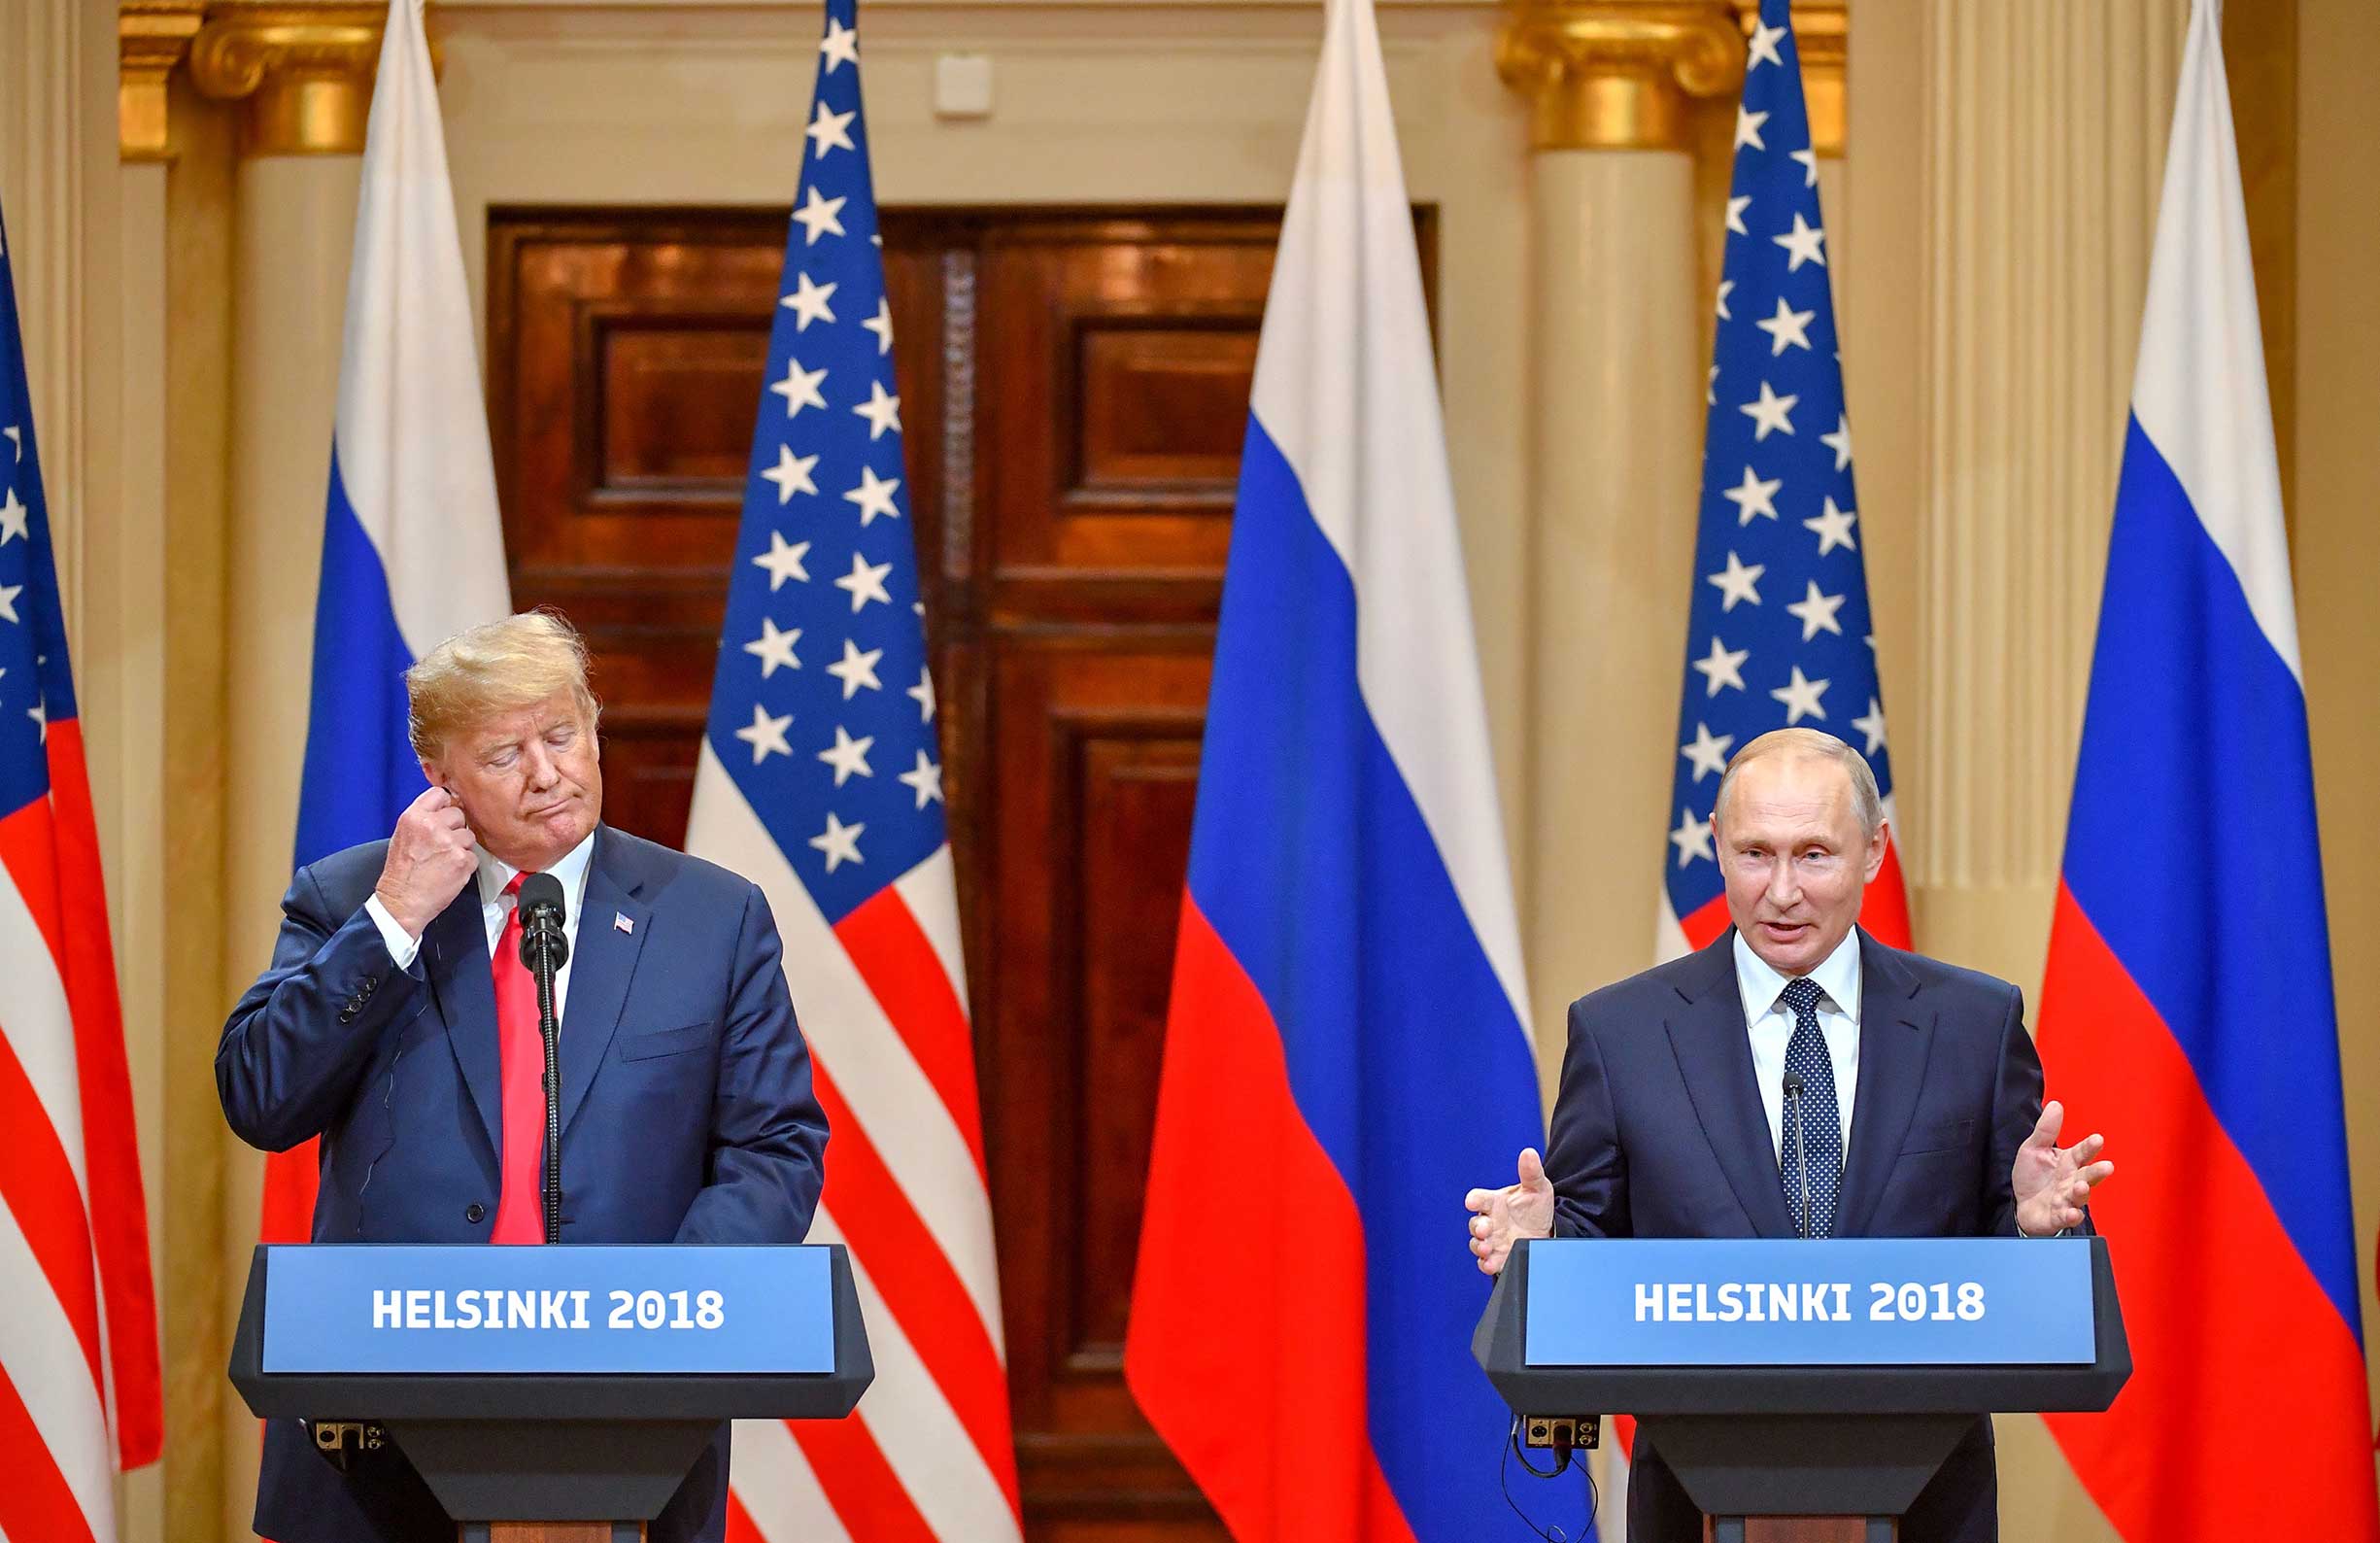 US President Donald Trump and Russia's President Vladimir Putin attend a joint press conference after a meeting at the Presidential Palace in Helsinki, on July 16, 2018. (Yuri Kadobnov—AFP/Getty Images)